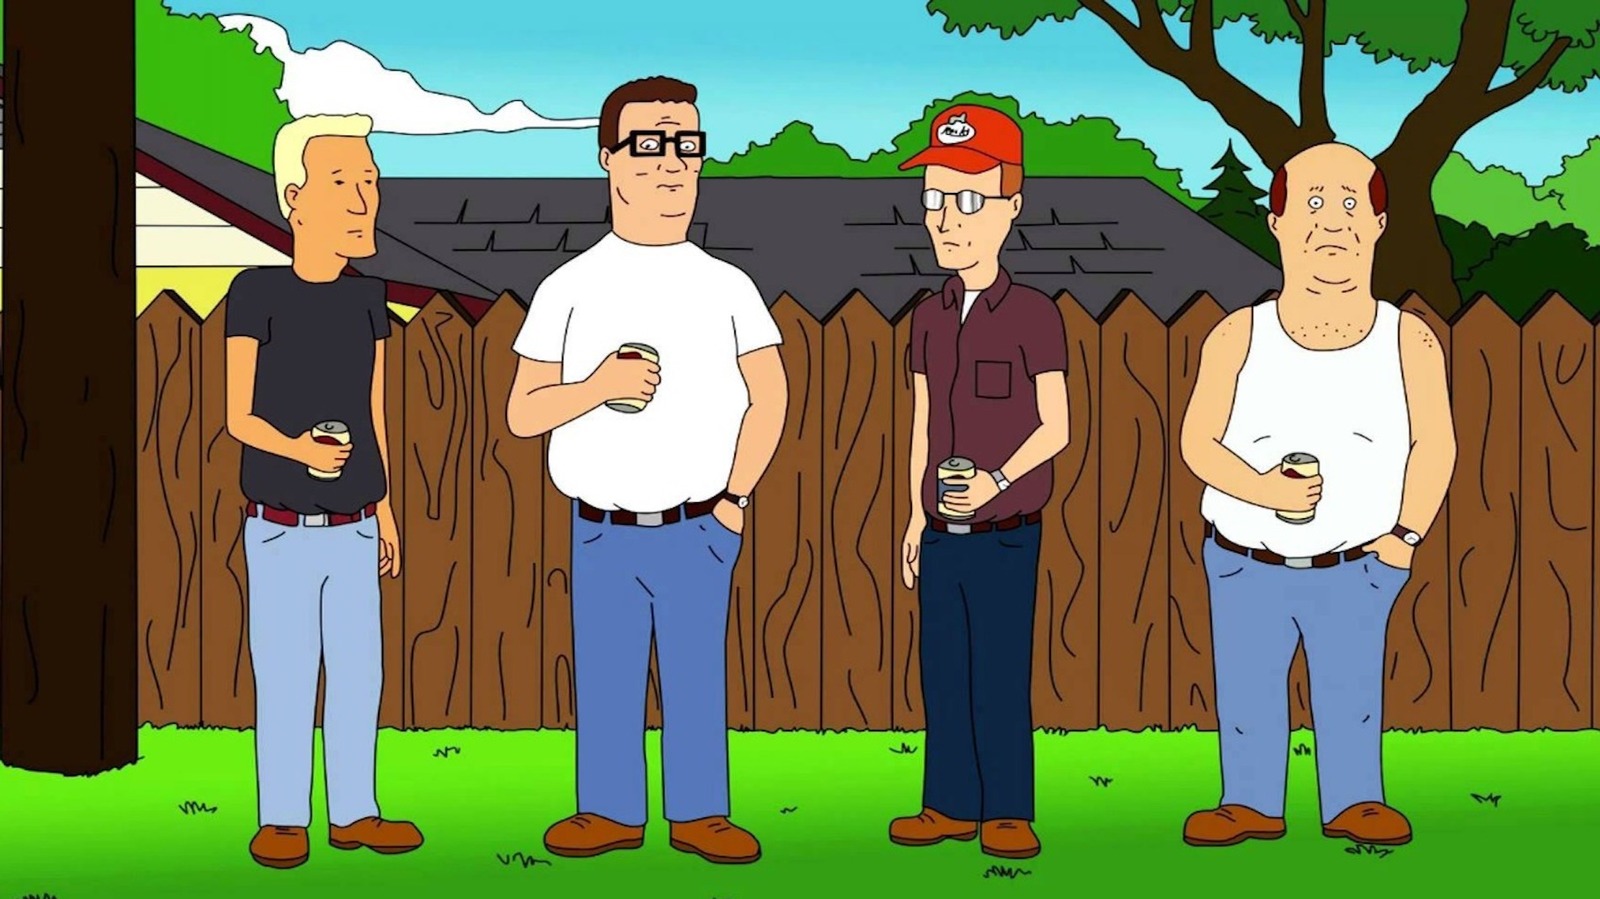 Start your week off by watching this 'King of the Hill' 3D Intro